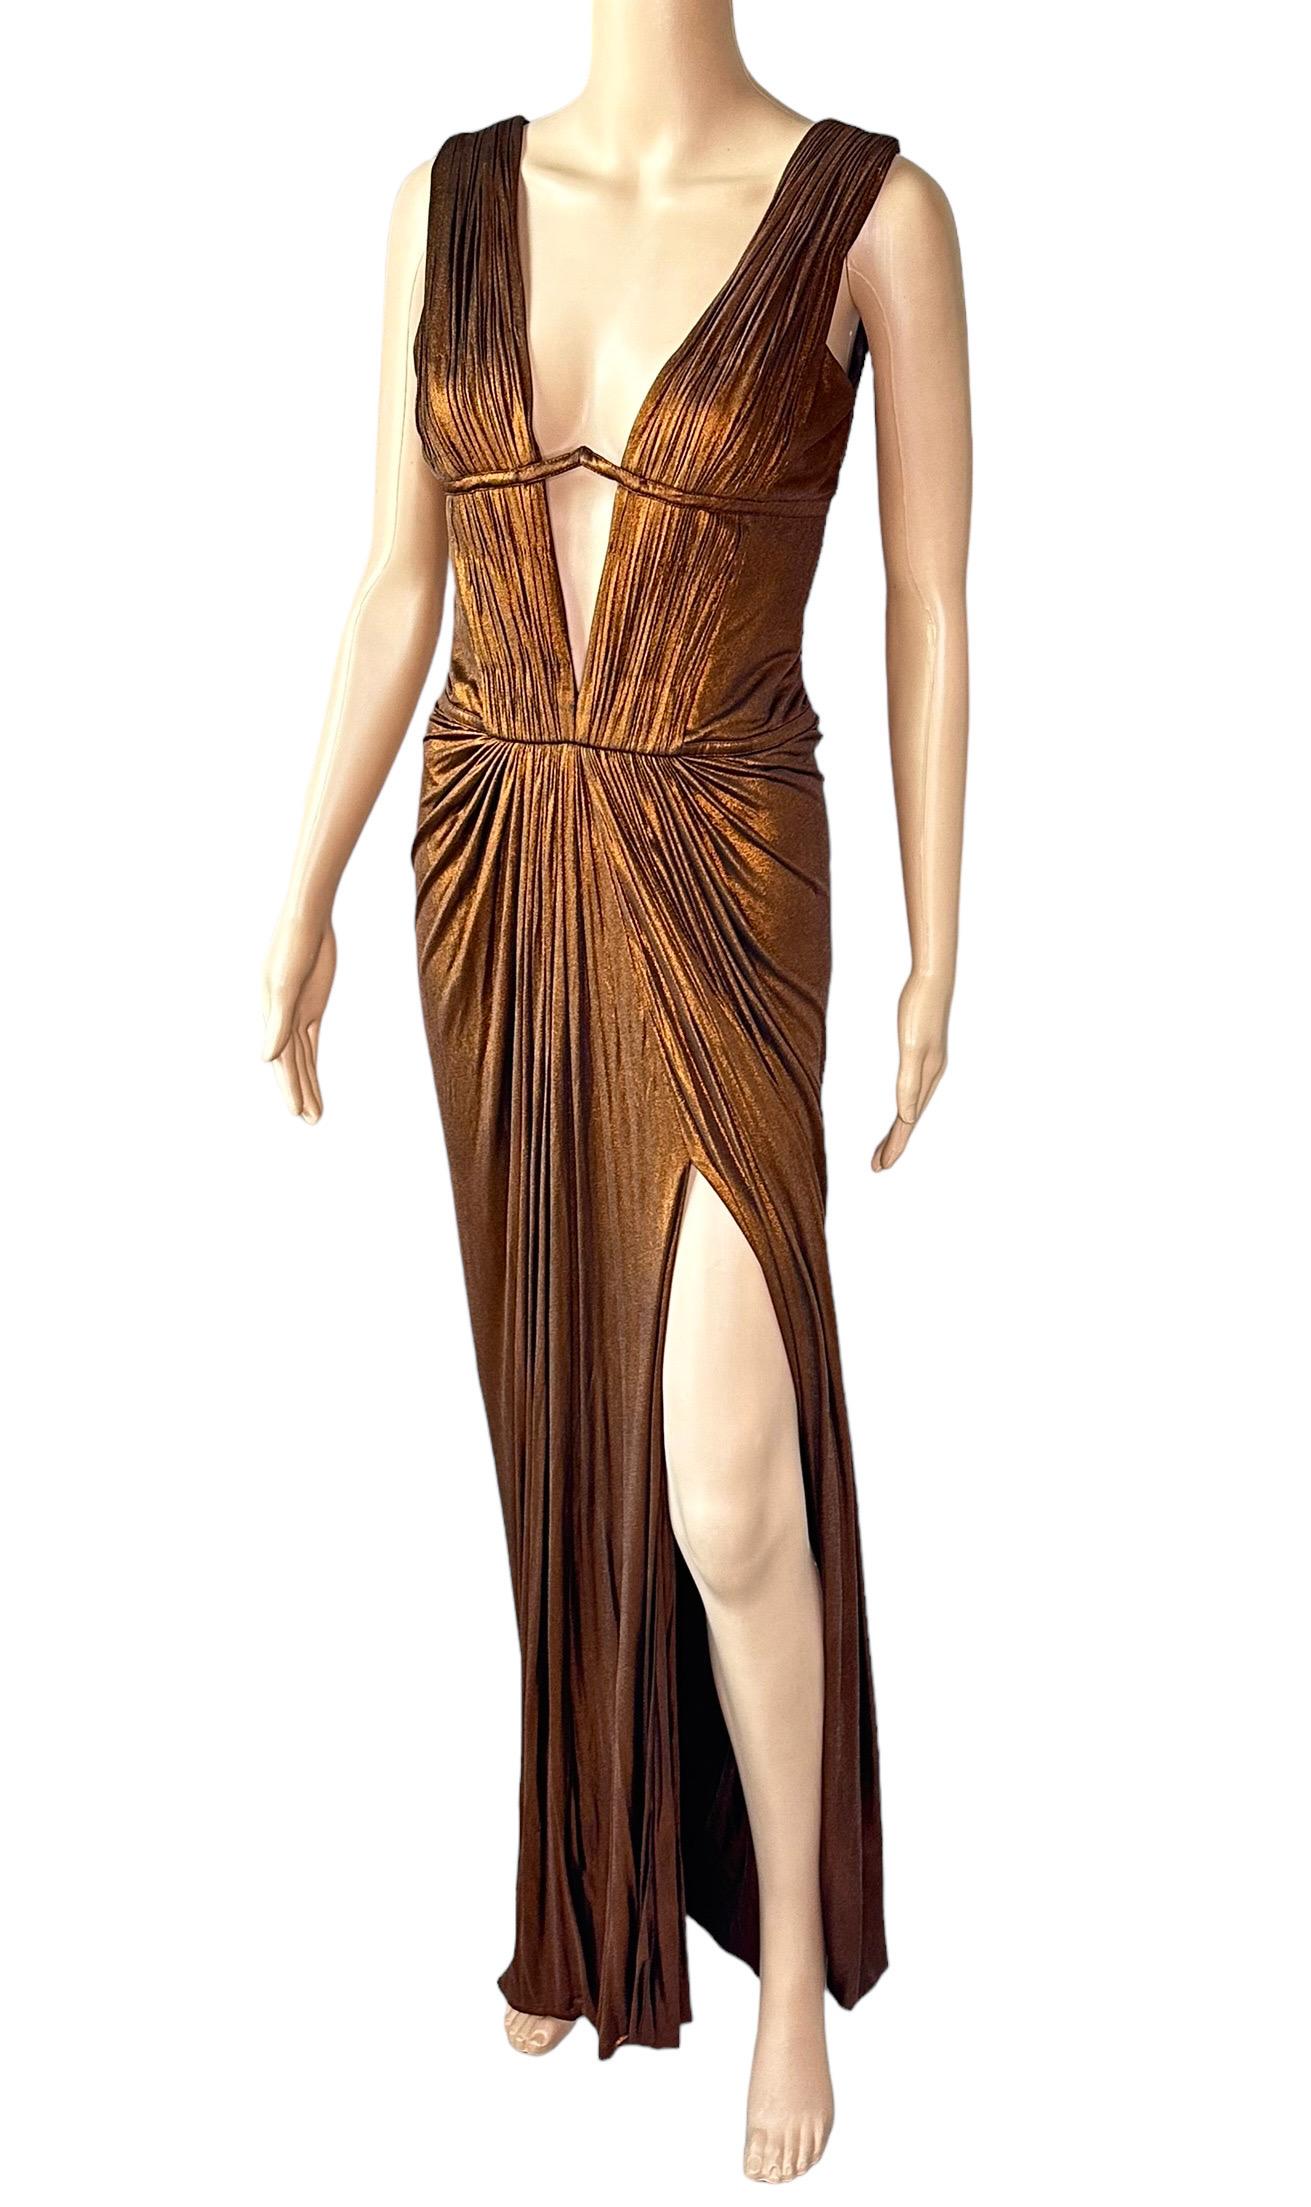 Roberto Cavalli F/W 2007 Metallic Plunging Neckline Open Back Evening Dress Gown 

Size IT 44

Roberto Cavalli metallic evening dress featuring gathering on the bodice, pleats throughout, deep plunging neckline, cutout back and concealed zip closure